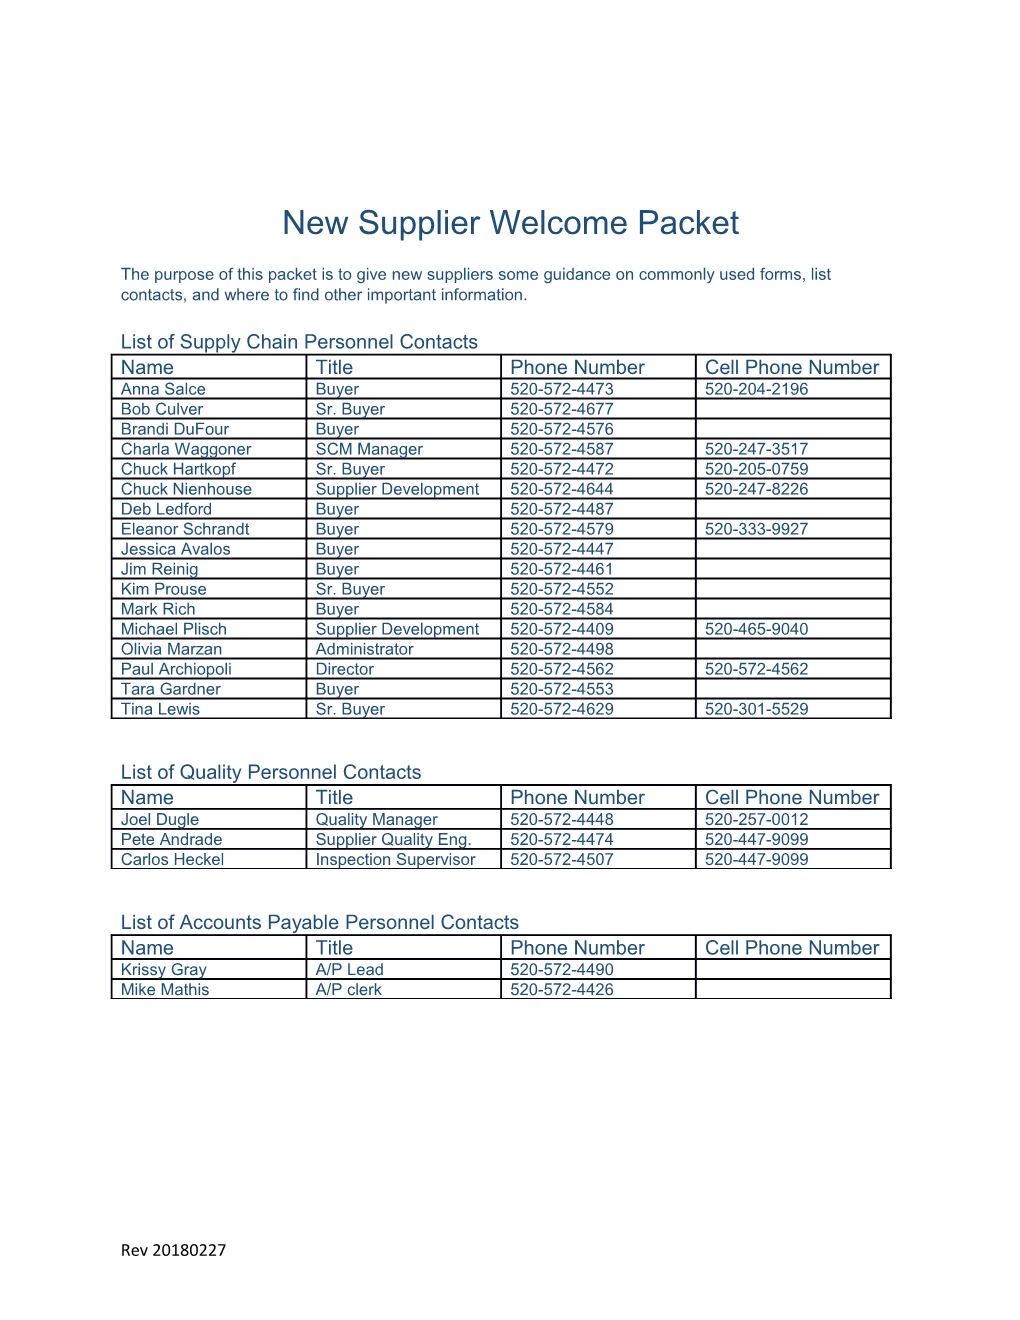 New Supplier Welcome Packet